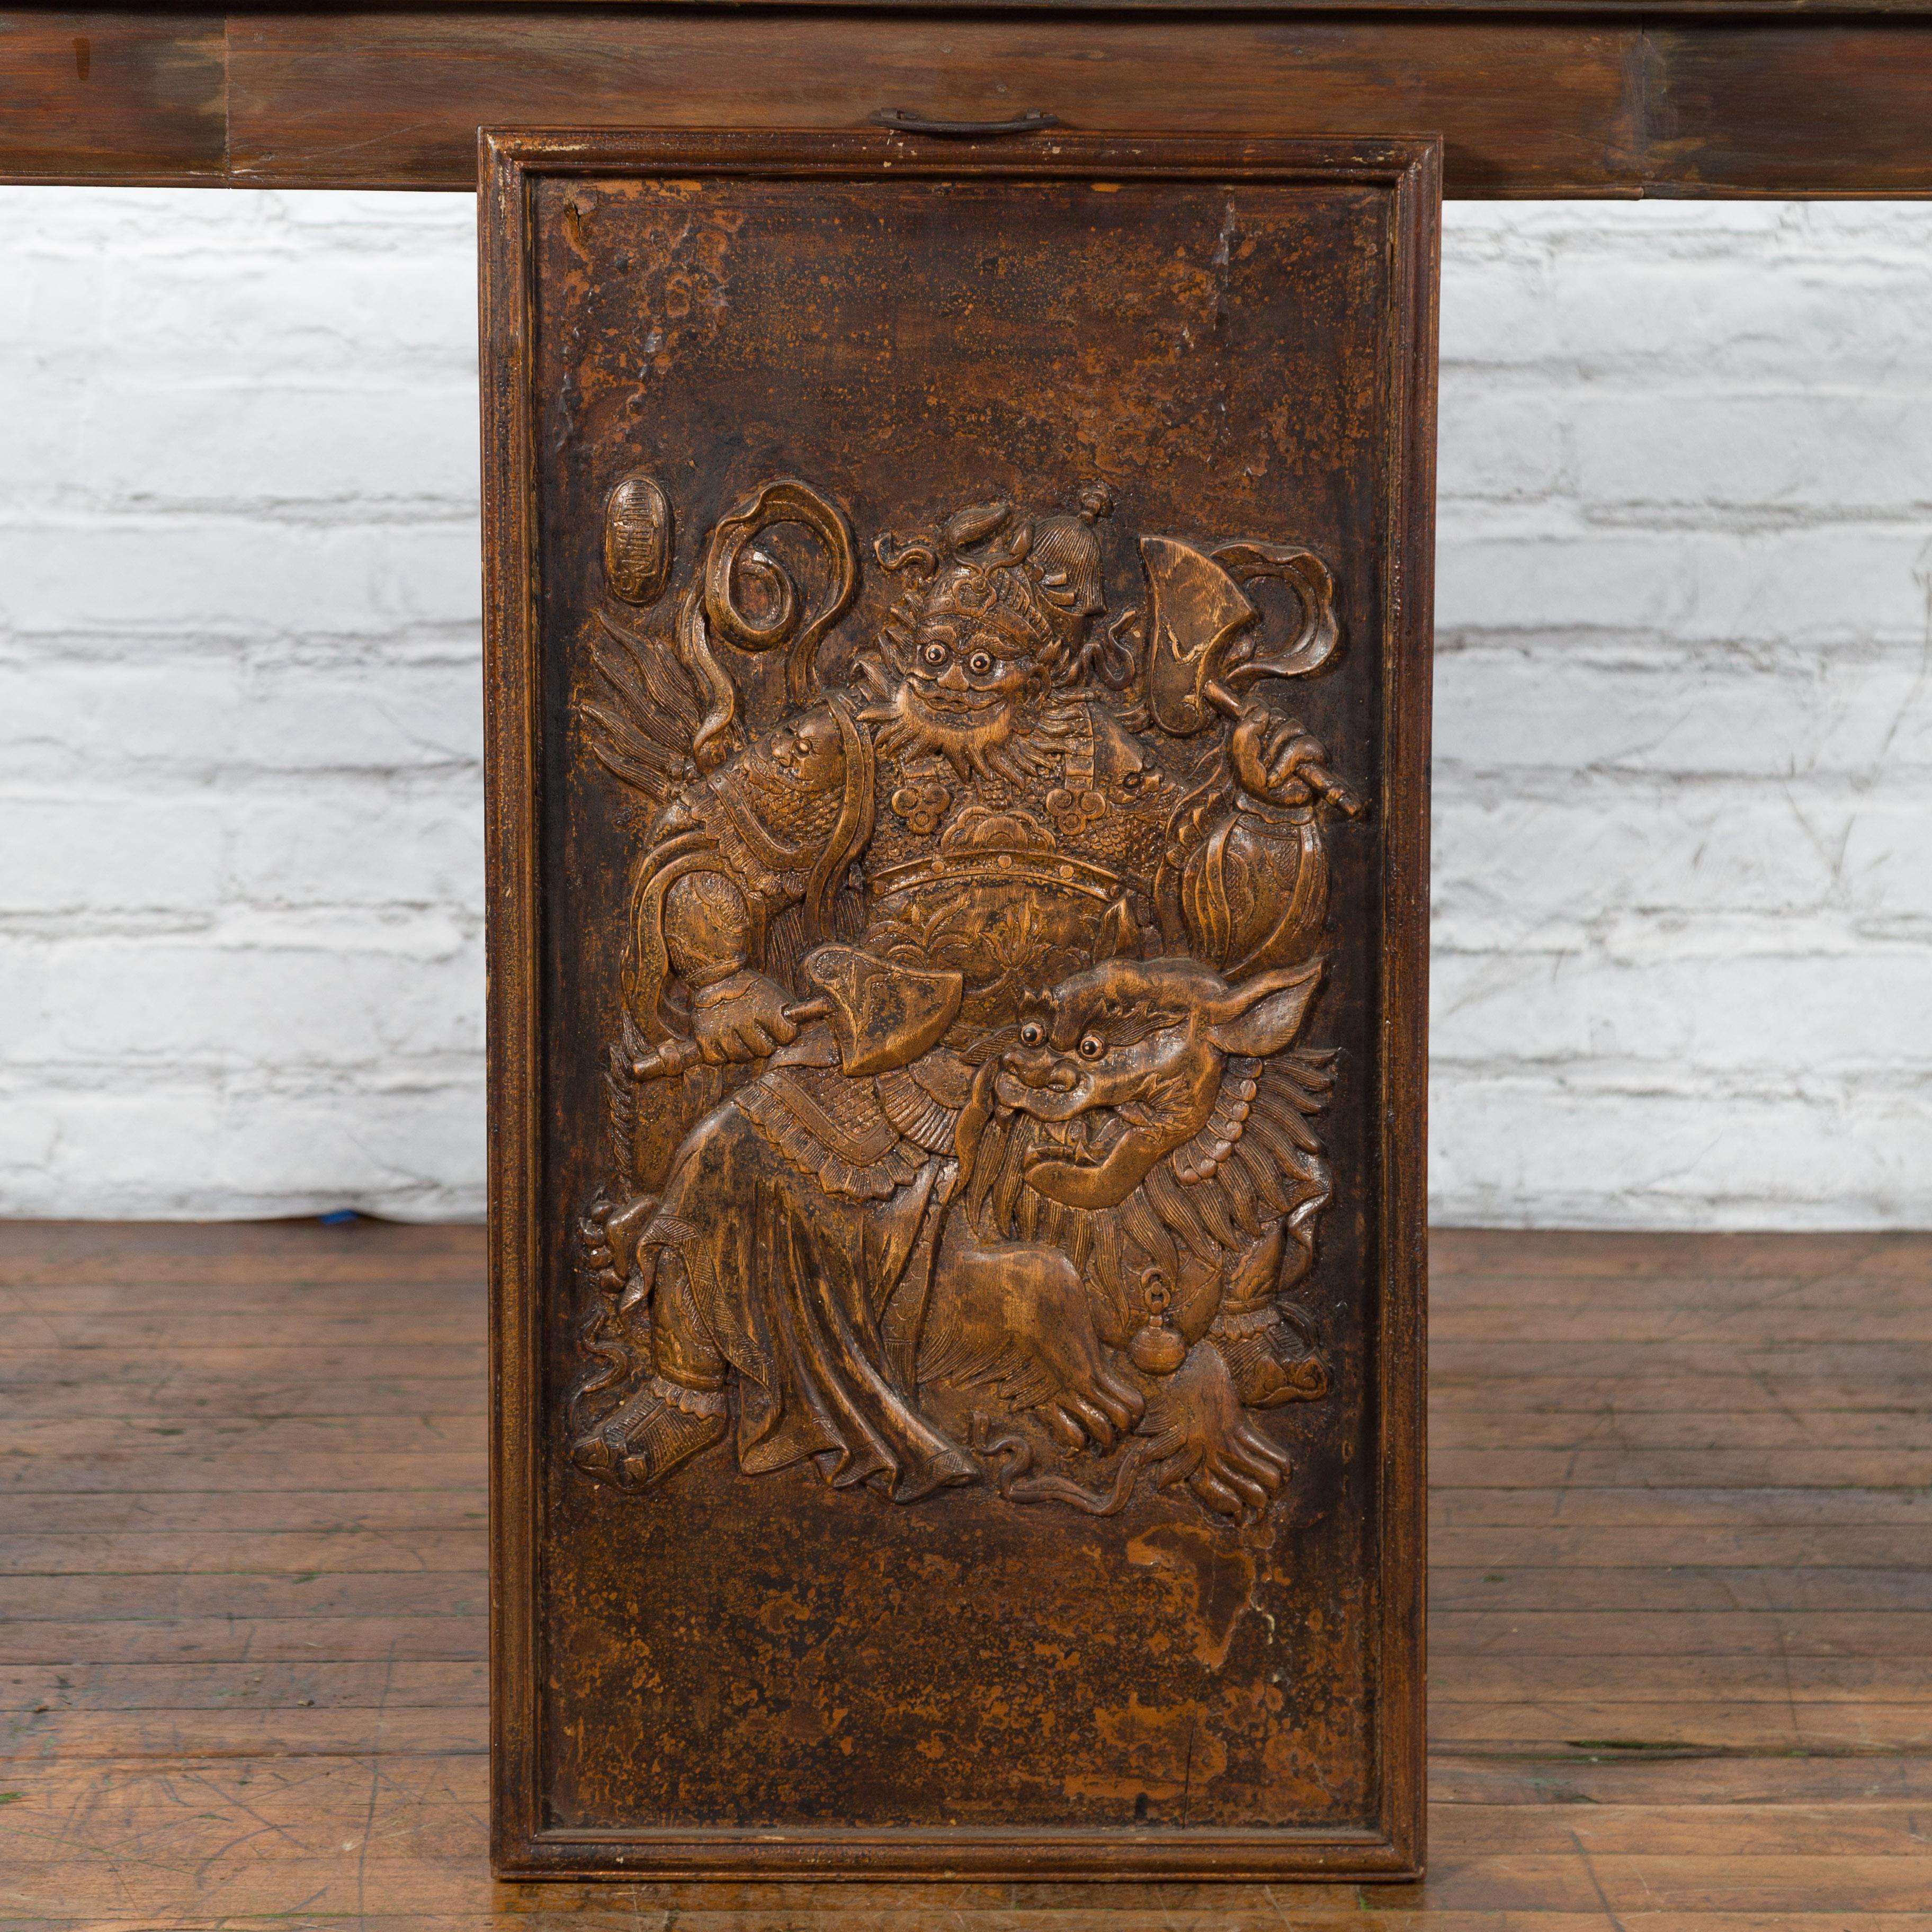 Carved Chinese Zhejiang Vintage Low-Relief Wall Plaque Depicting a Celestial Guardian For Sale